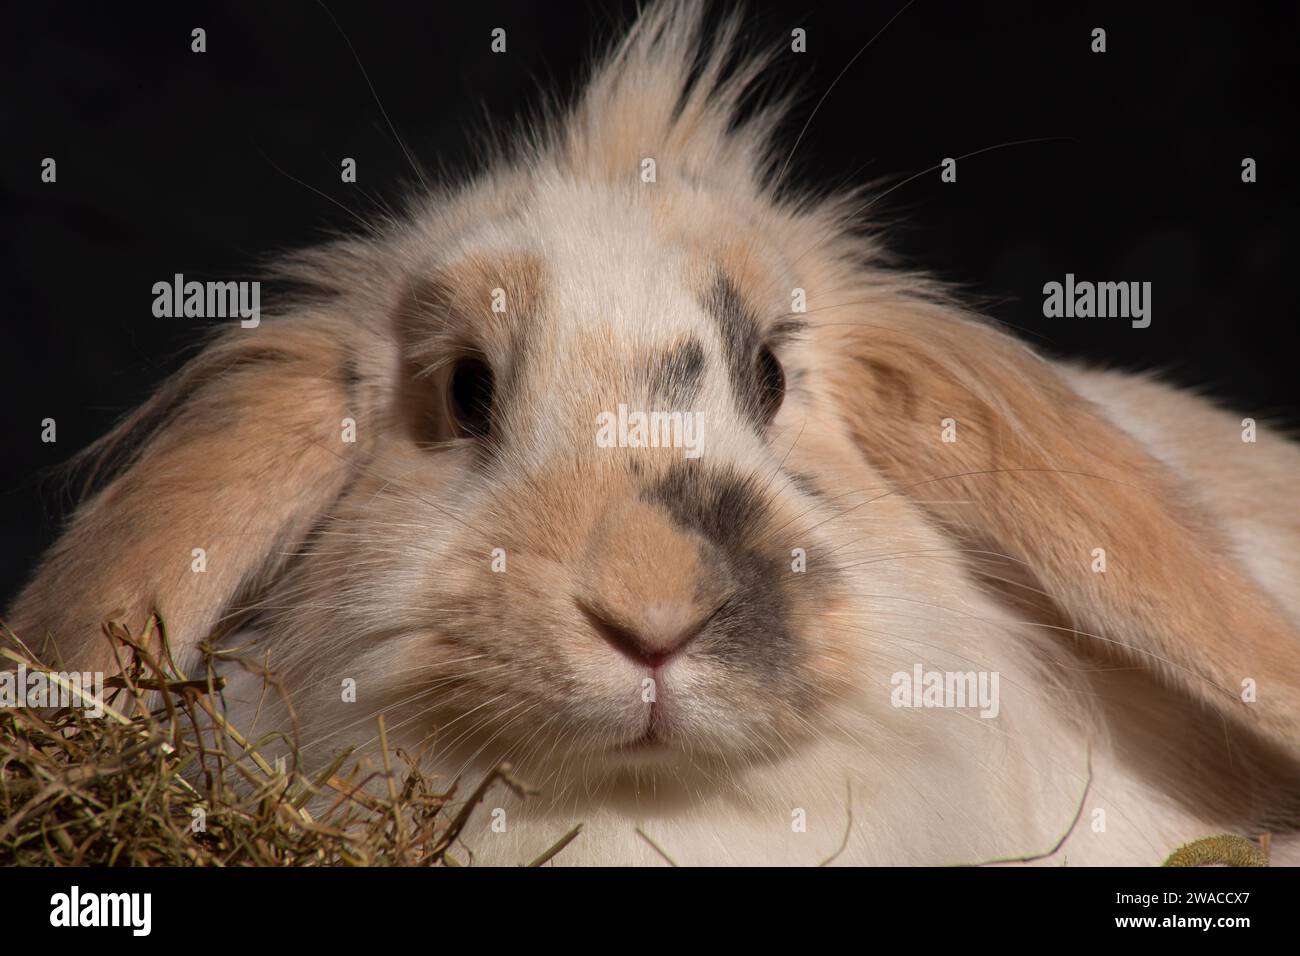 A fluffy Lionhead Lop-eared rabbit, irresistibly cute, playfully pokes its head into a picnic basket. Against a dark backdrop Stock Photo